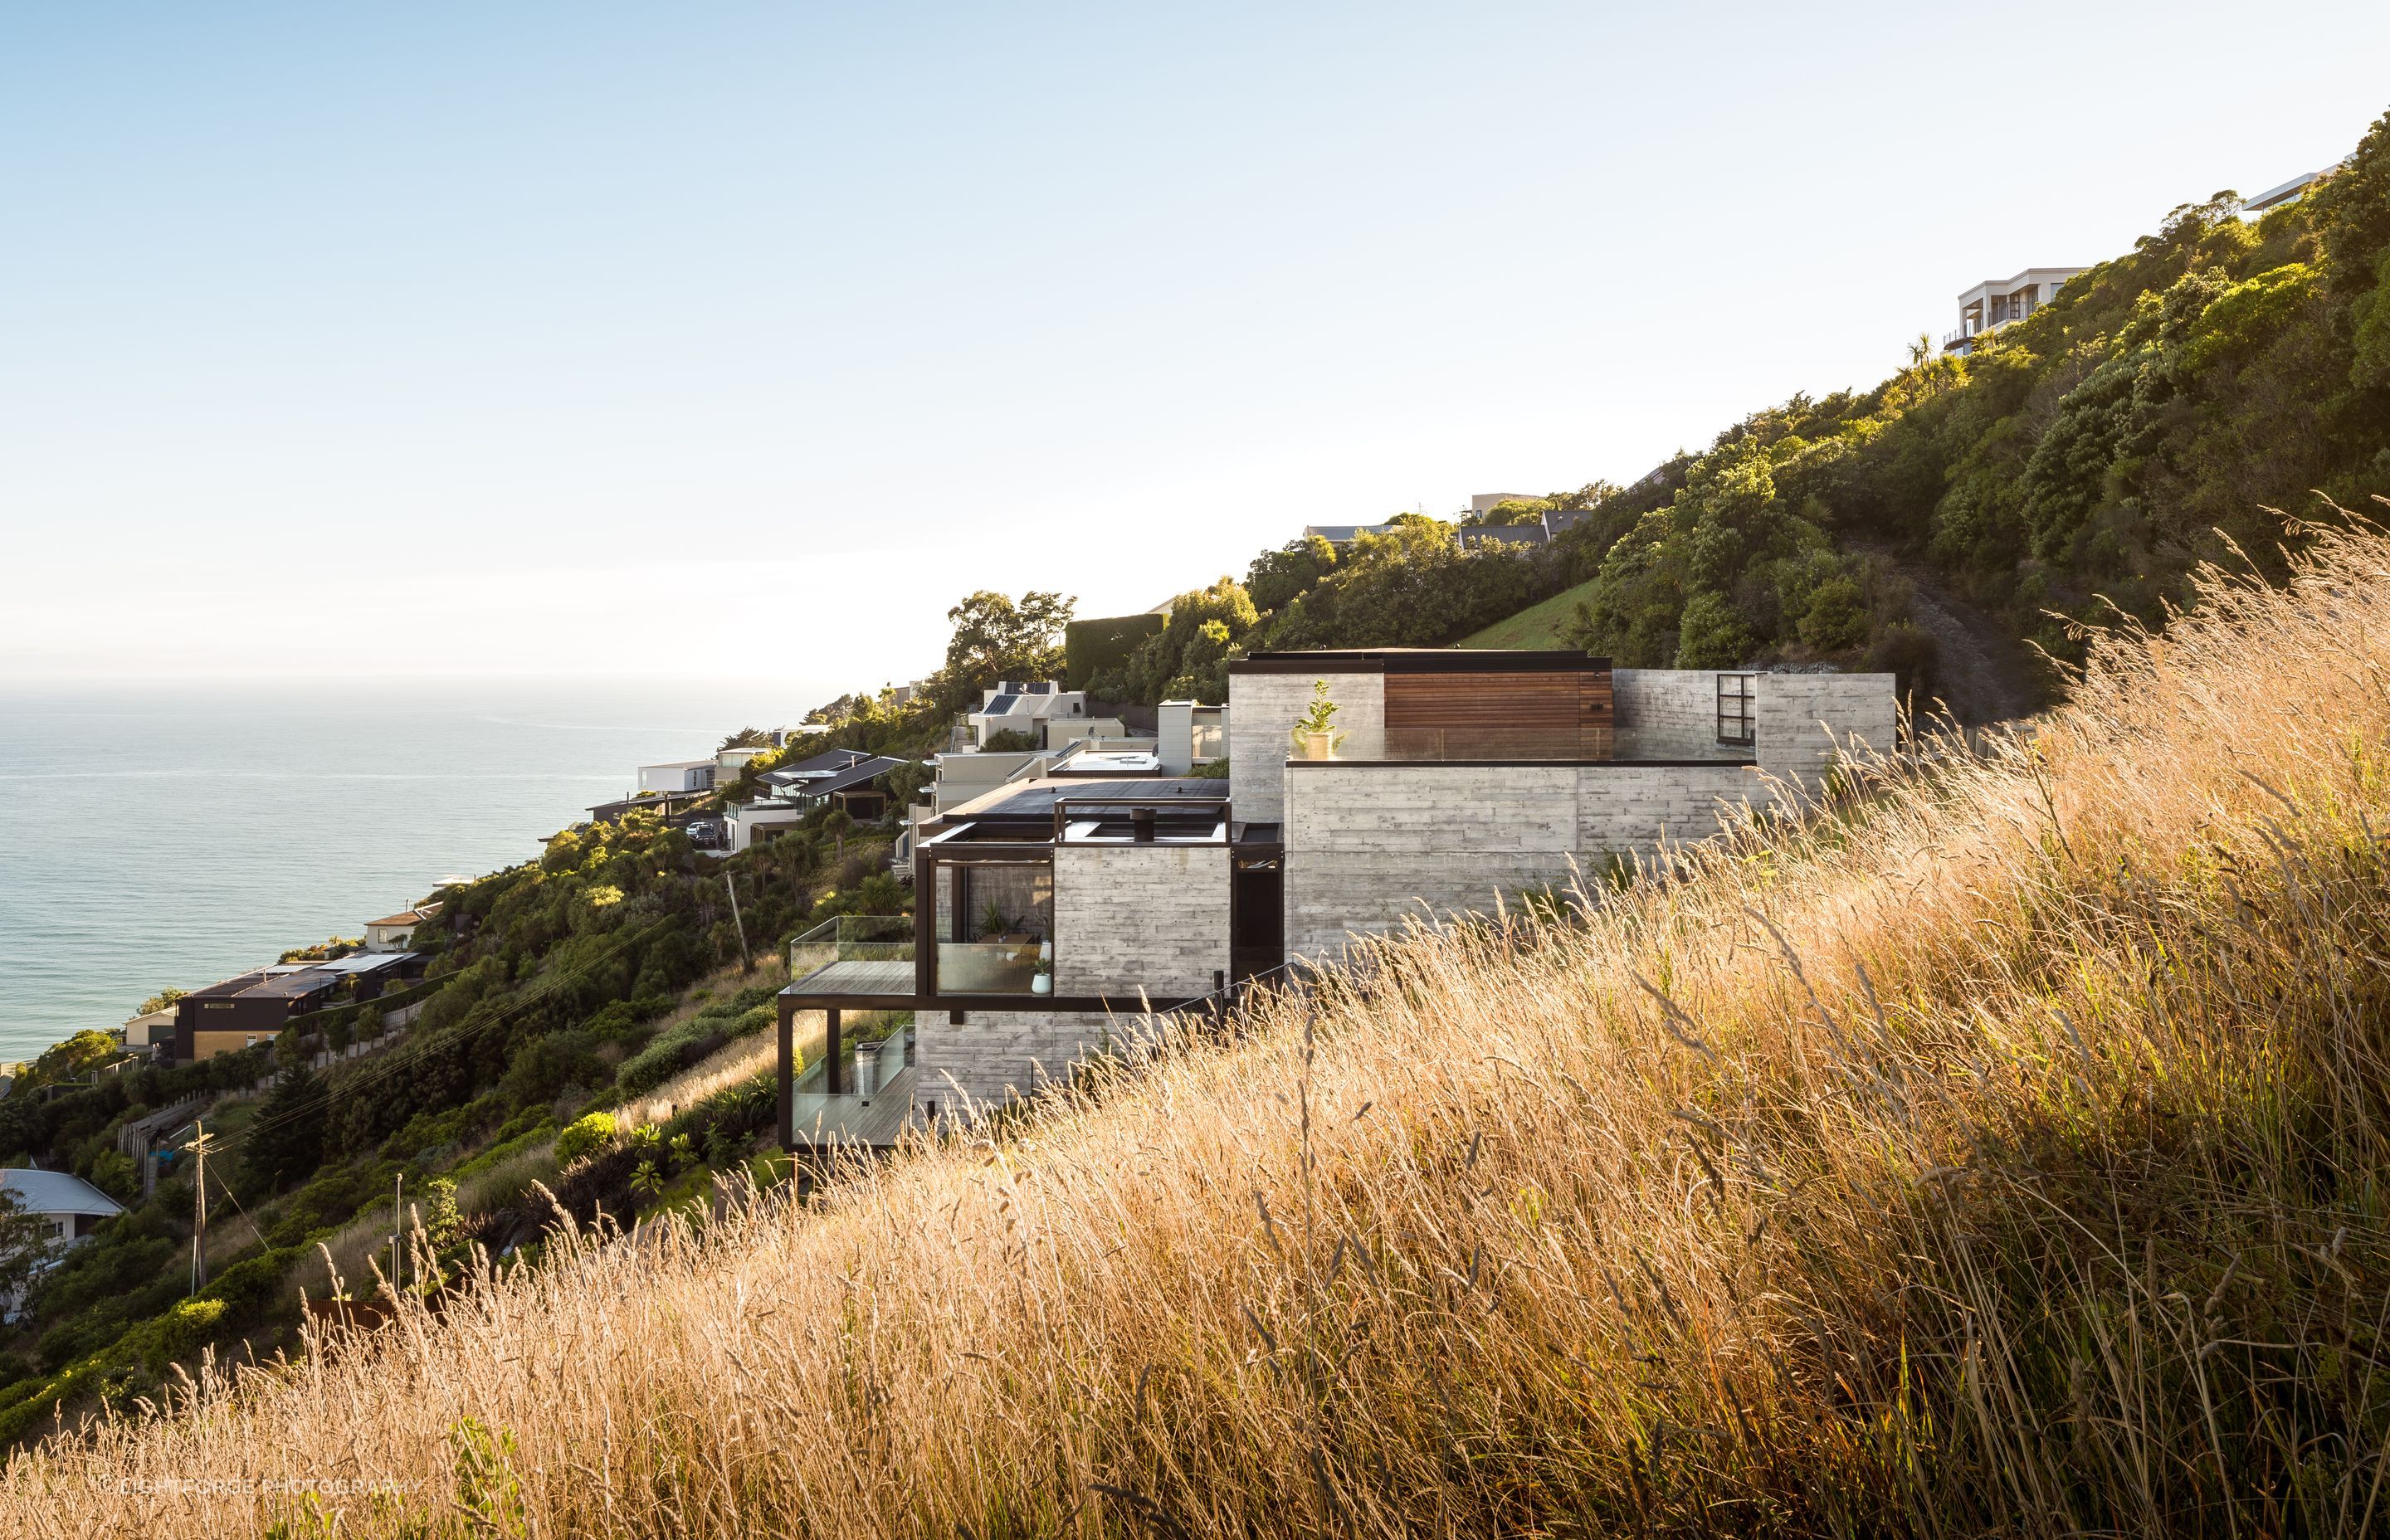 This Christchurch home overlooking the sea is constructed entirely in in-situ concrete due to access issues to the site.